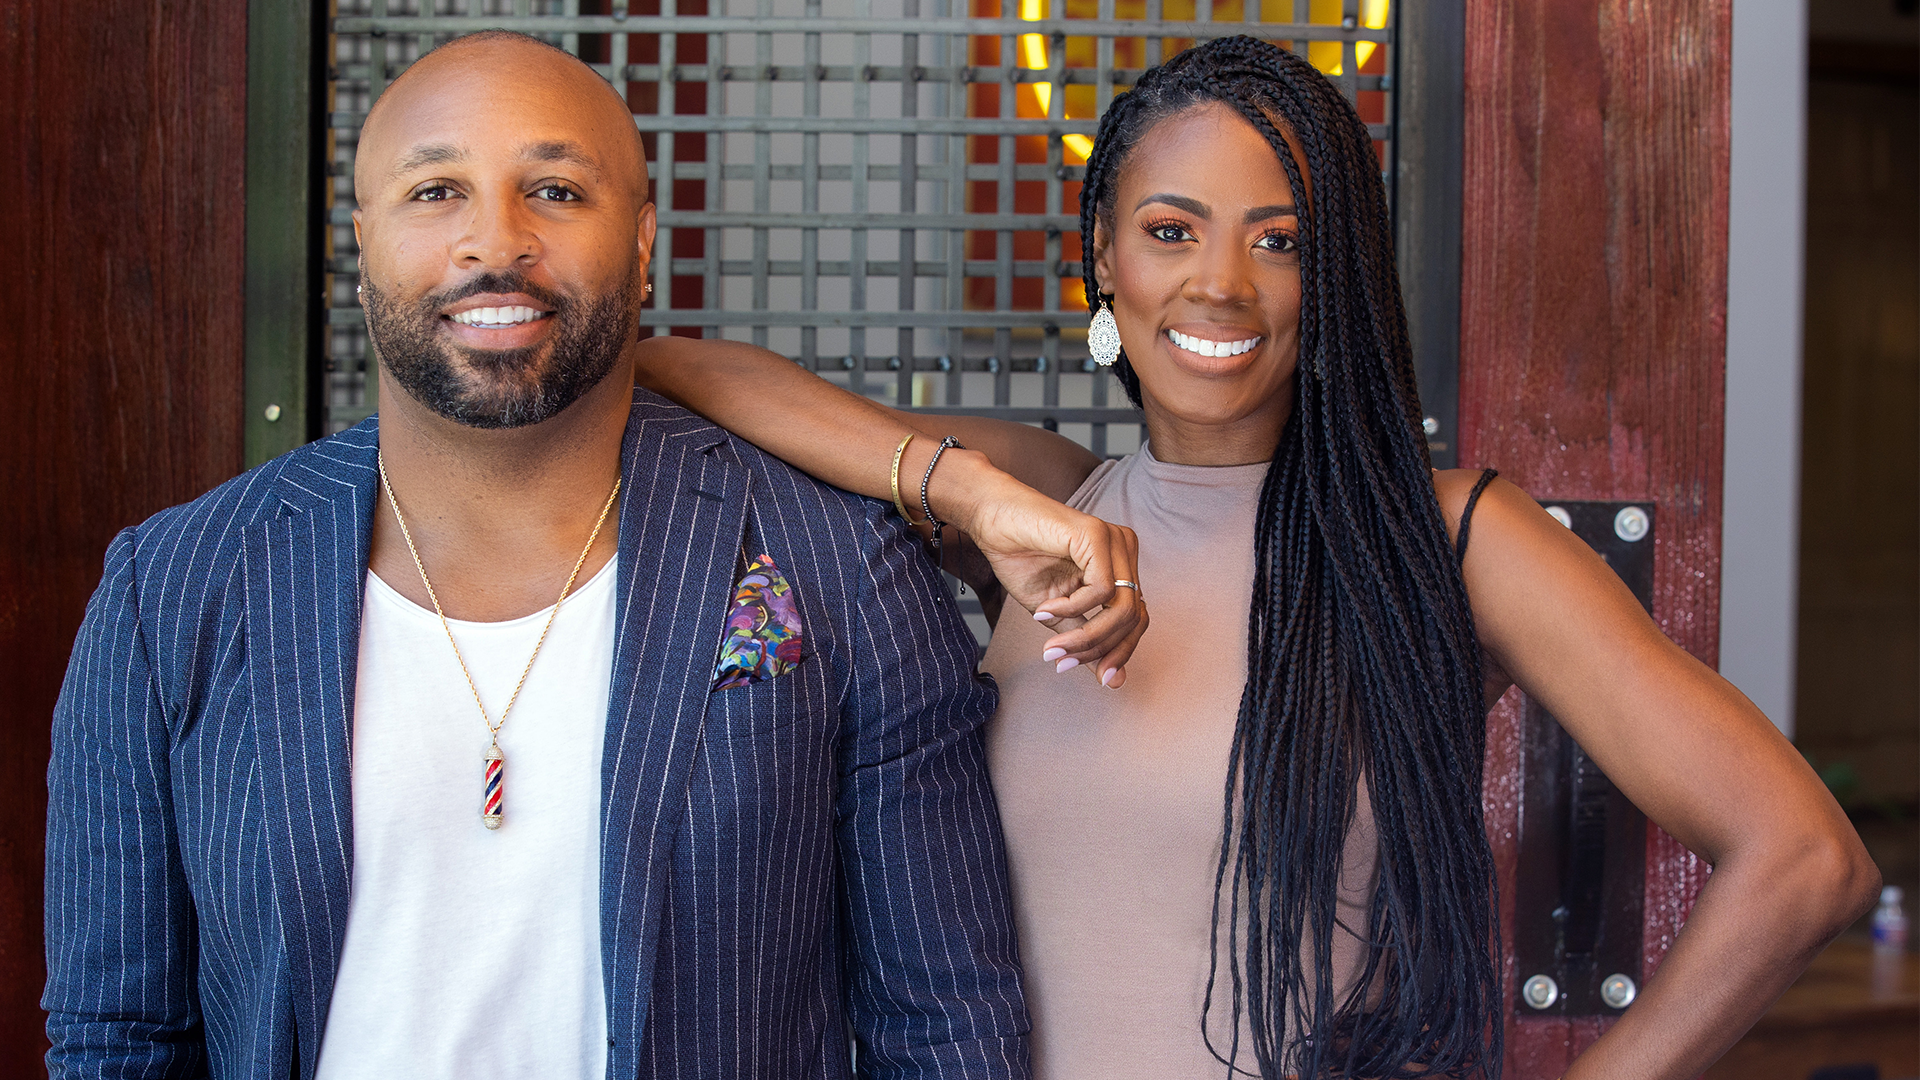 This Couple Created A First-Of-Its-Kind App To Solve Their Own Problem, Then Ended Up Helping Other Small Businesses Across 900 Cities